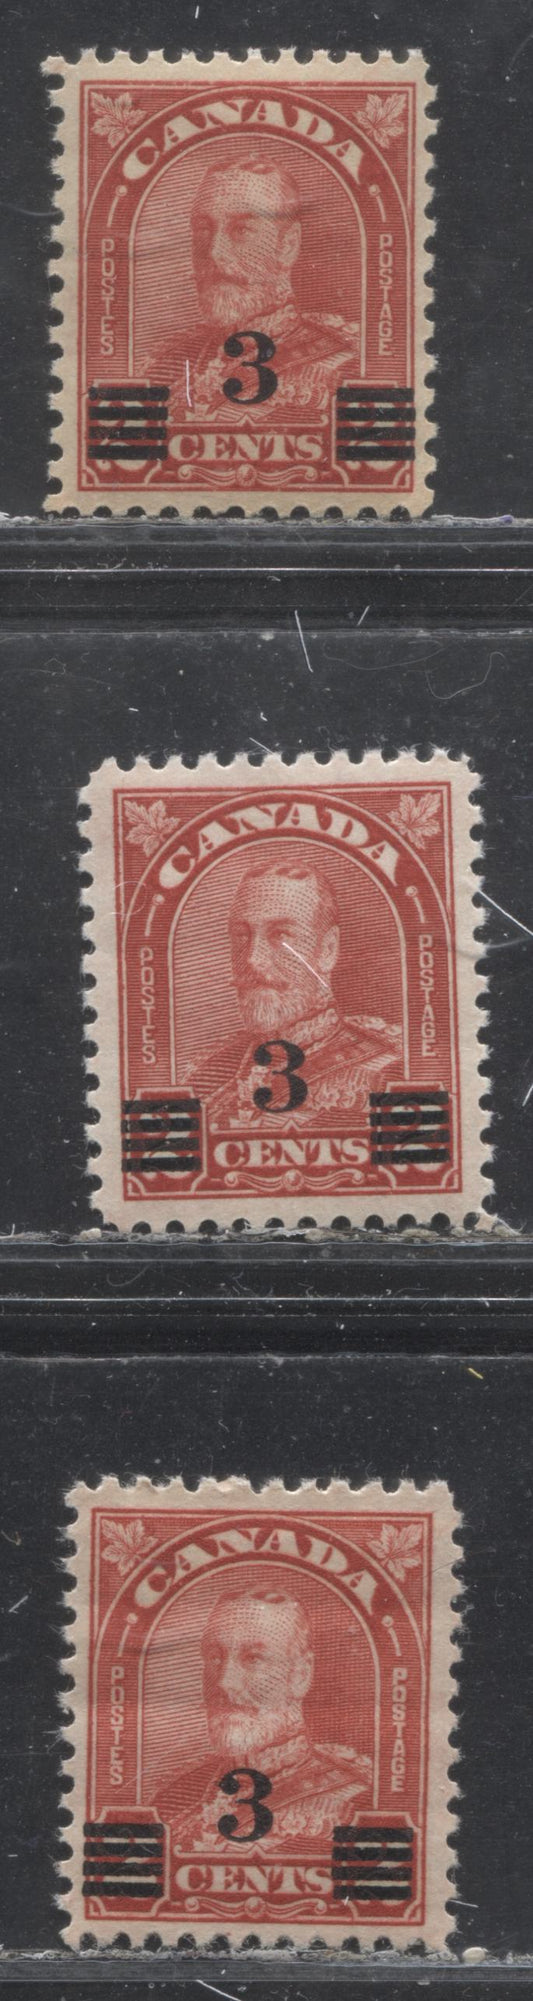 Lot 282 Canada #191-a 3c On 2c Deep Red King George V, 1932 Arch/Leaf Provisional Issue, 3 VFNH Singles Showing Different Shades And Dies